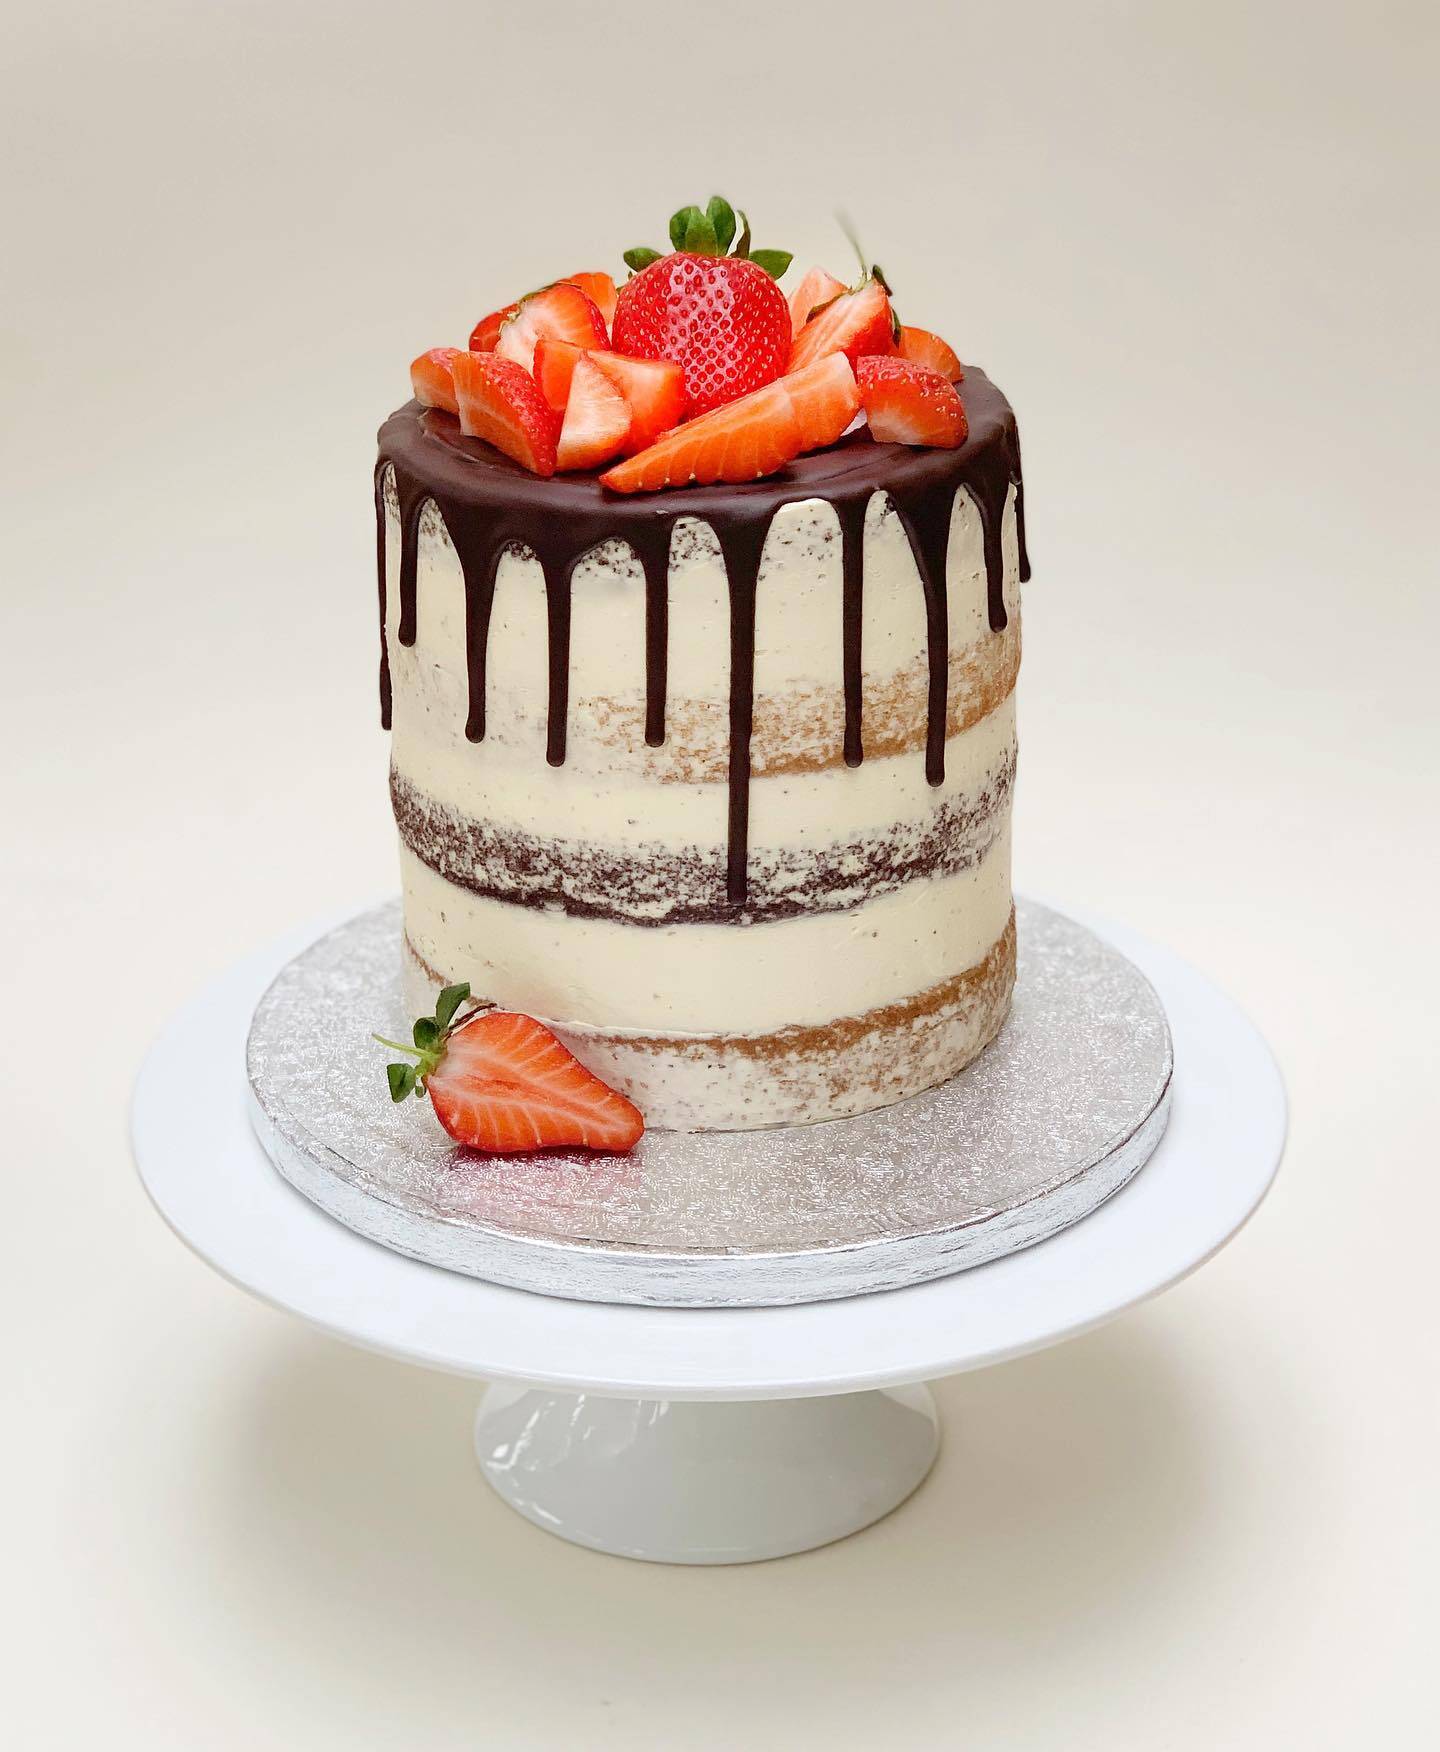 Four layers of delicious vanilla and chocolate sponge